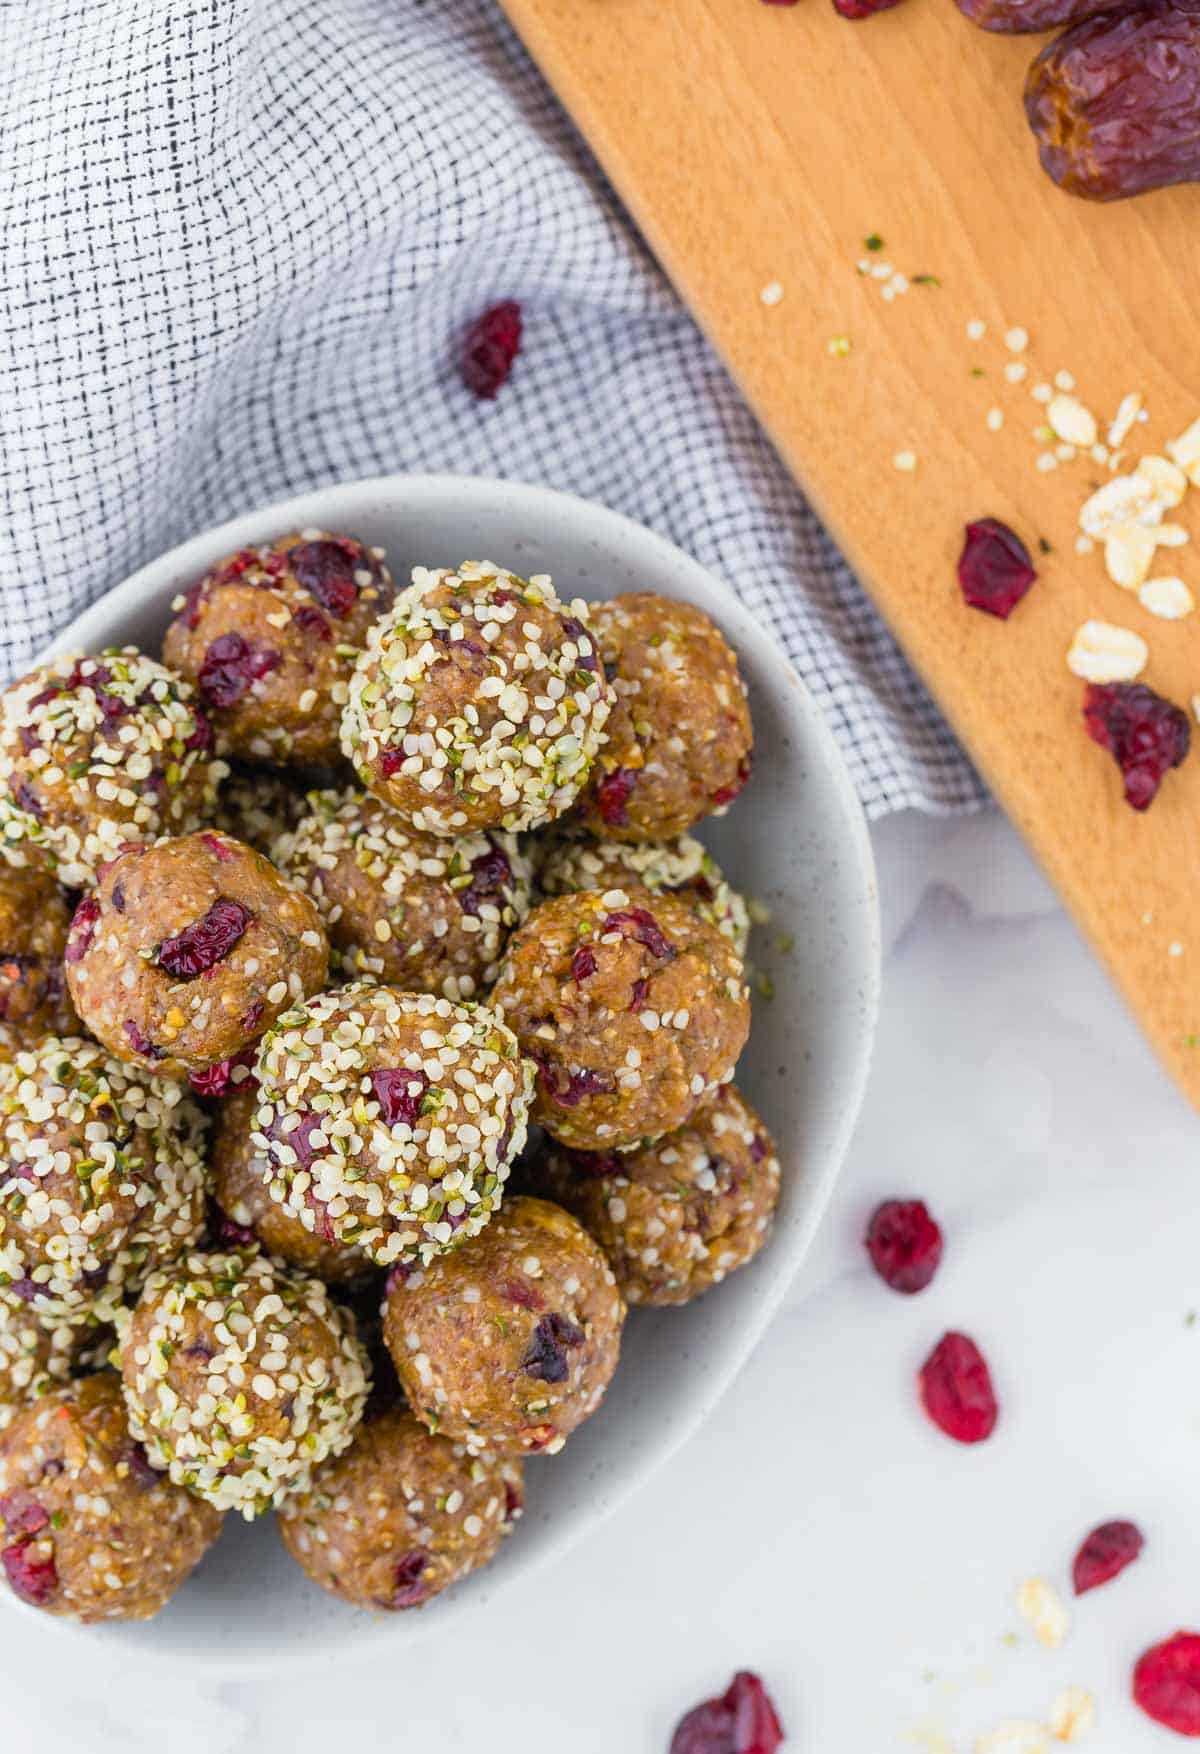 Overhead view of bowl of energy bites, with dried cranberries, oats and hemp seeds also pictured.